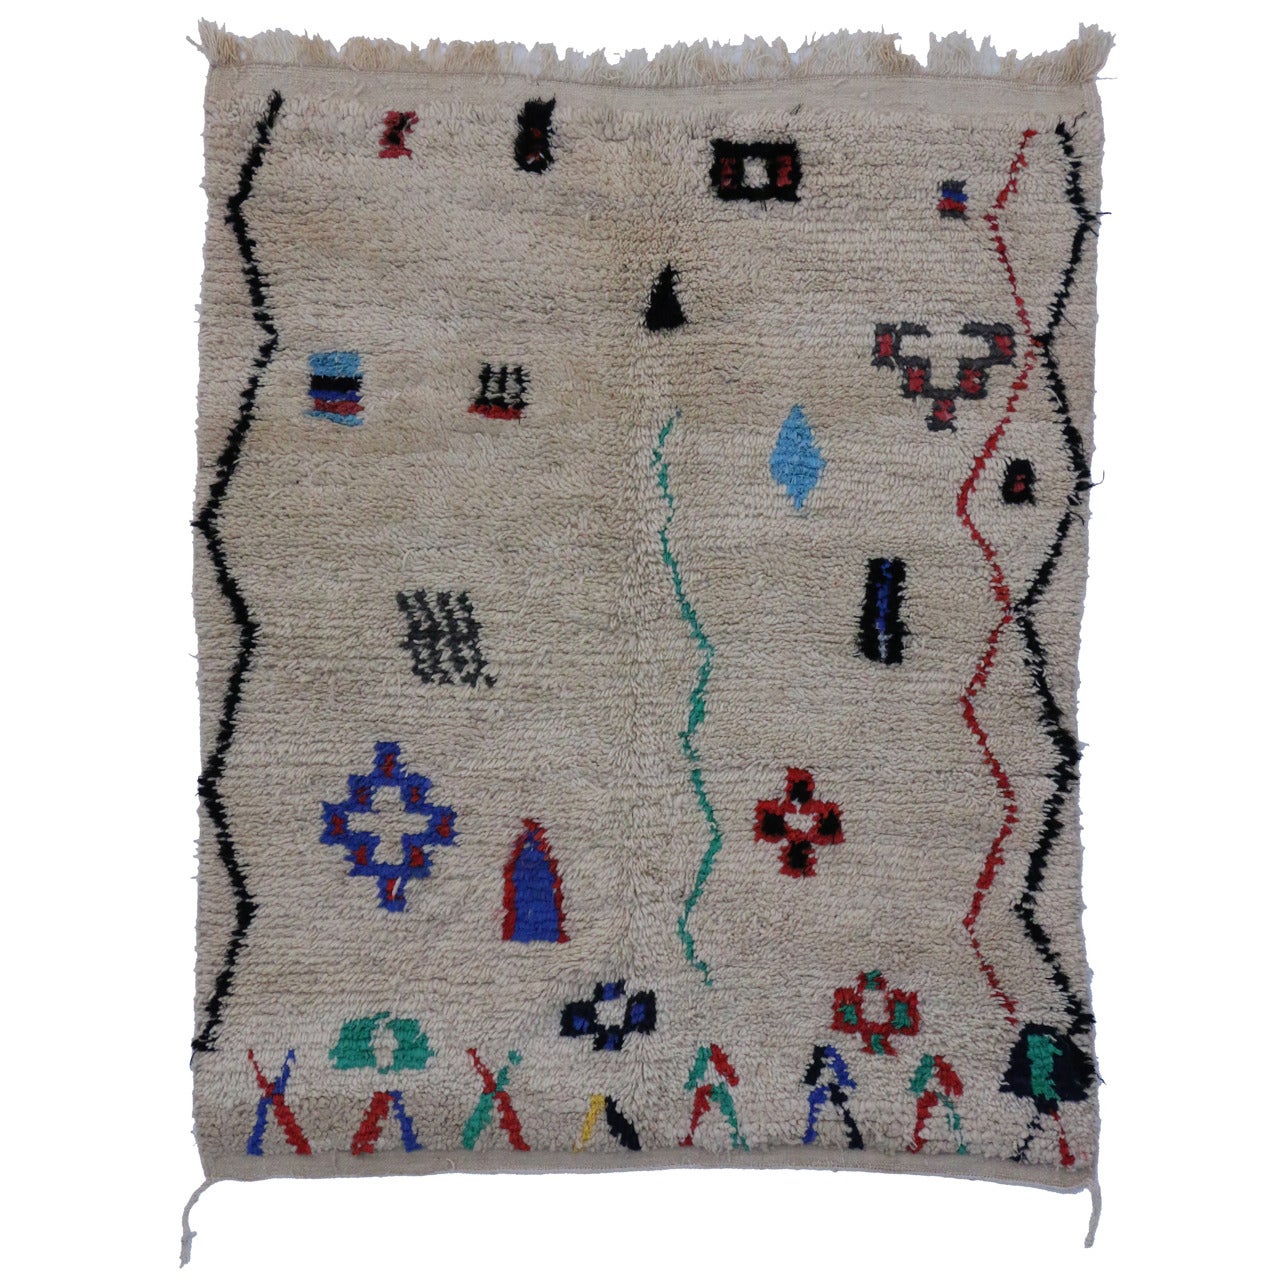 Berber Moroccan Rug with Tribal Design from Azilal Region